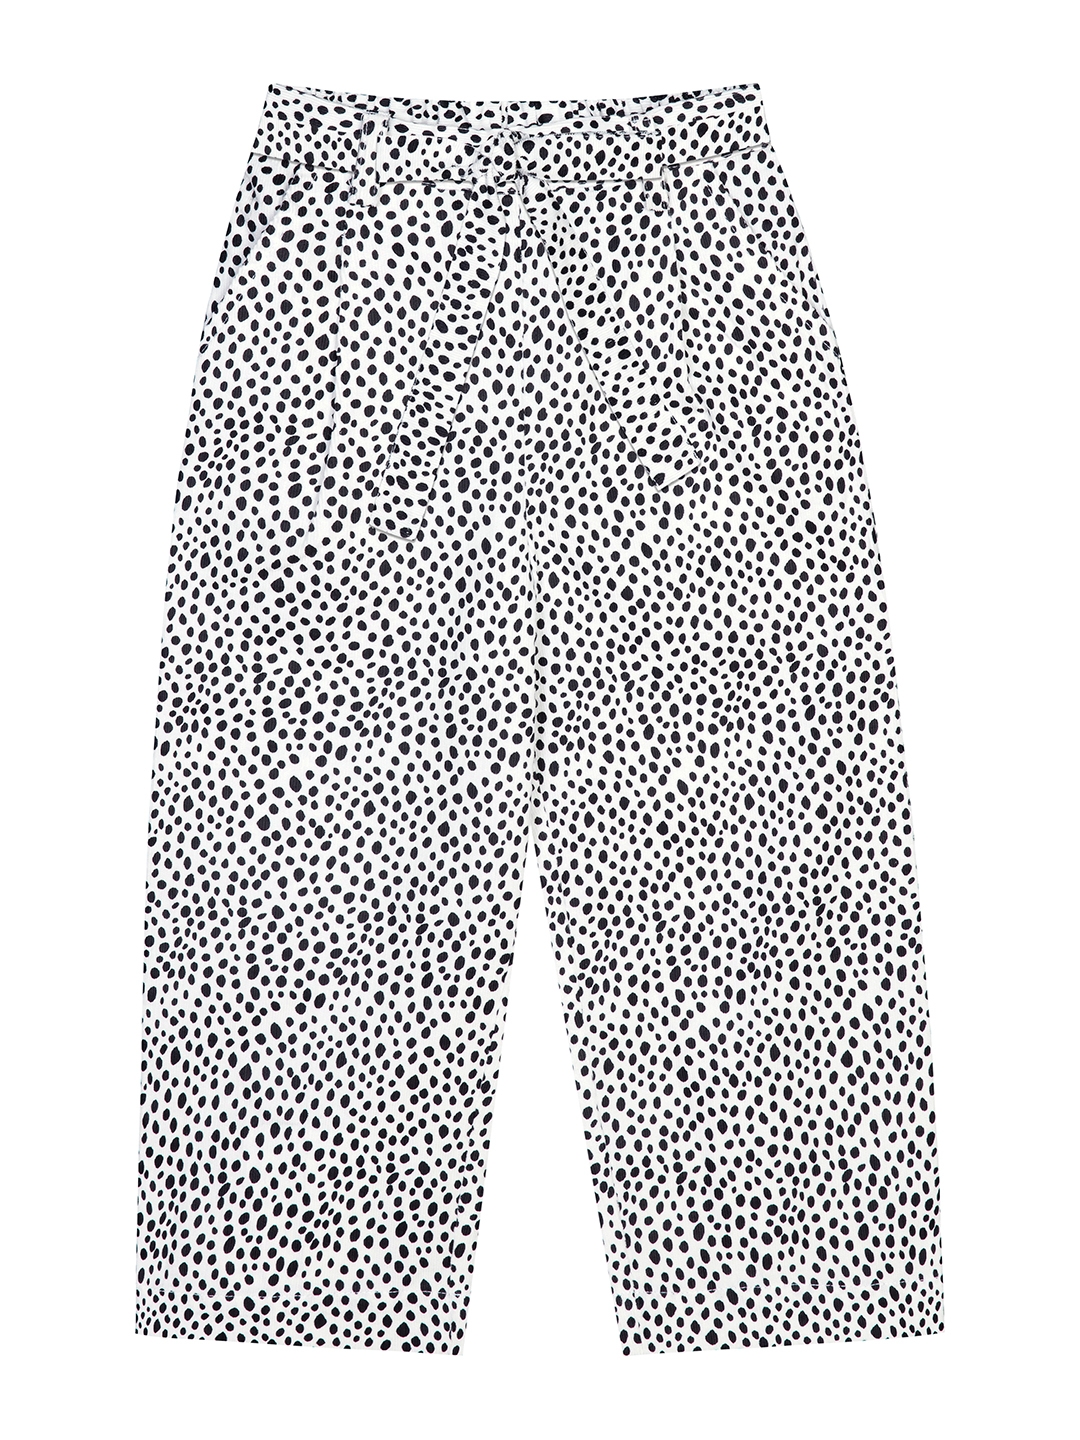 Budding Bees Girls Corduroy Printed Pant With Belt